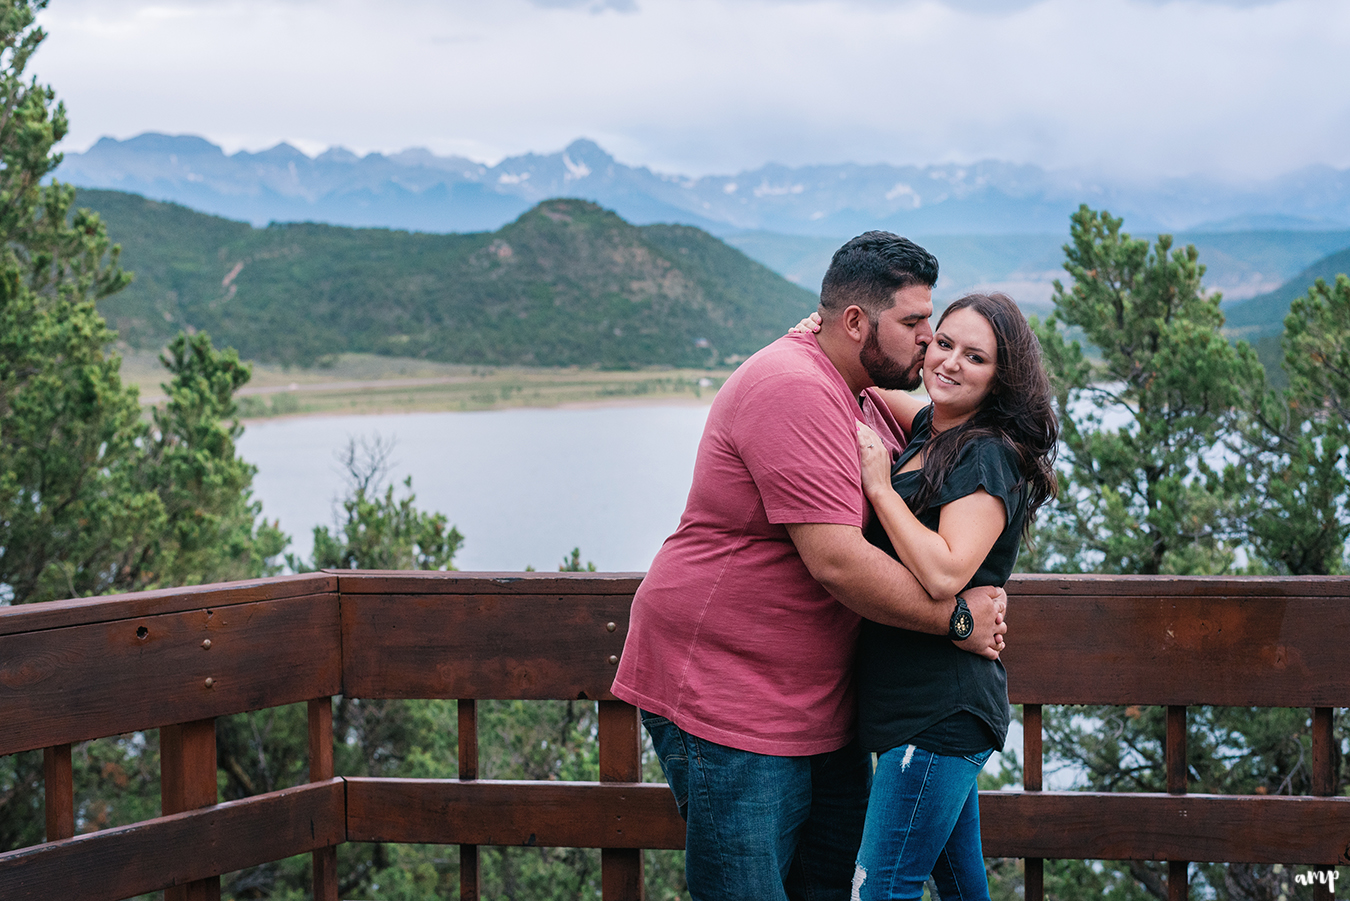 Engagement photos at the Ridgway state park overlook